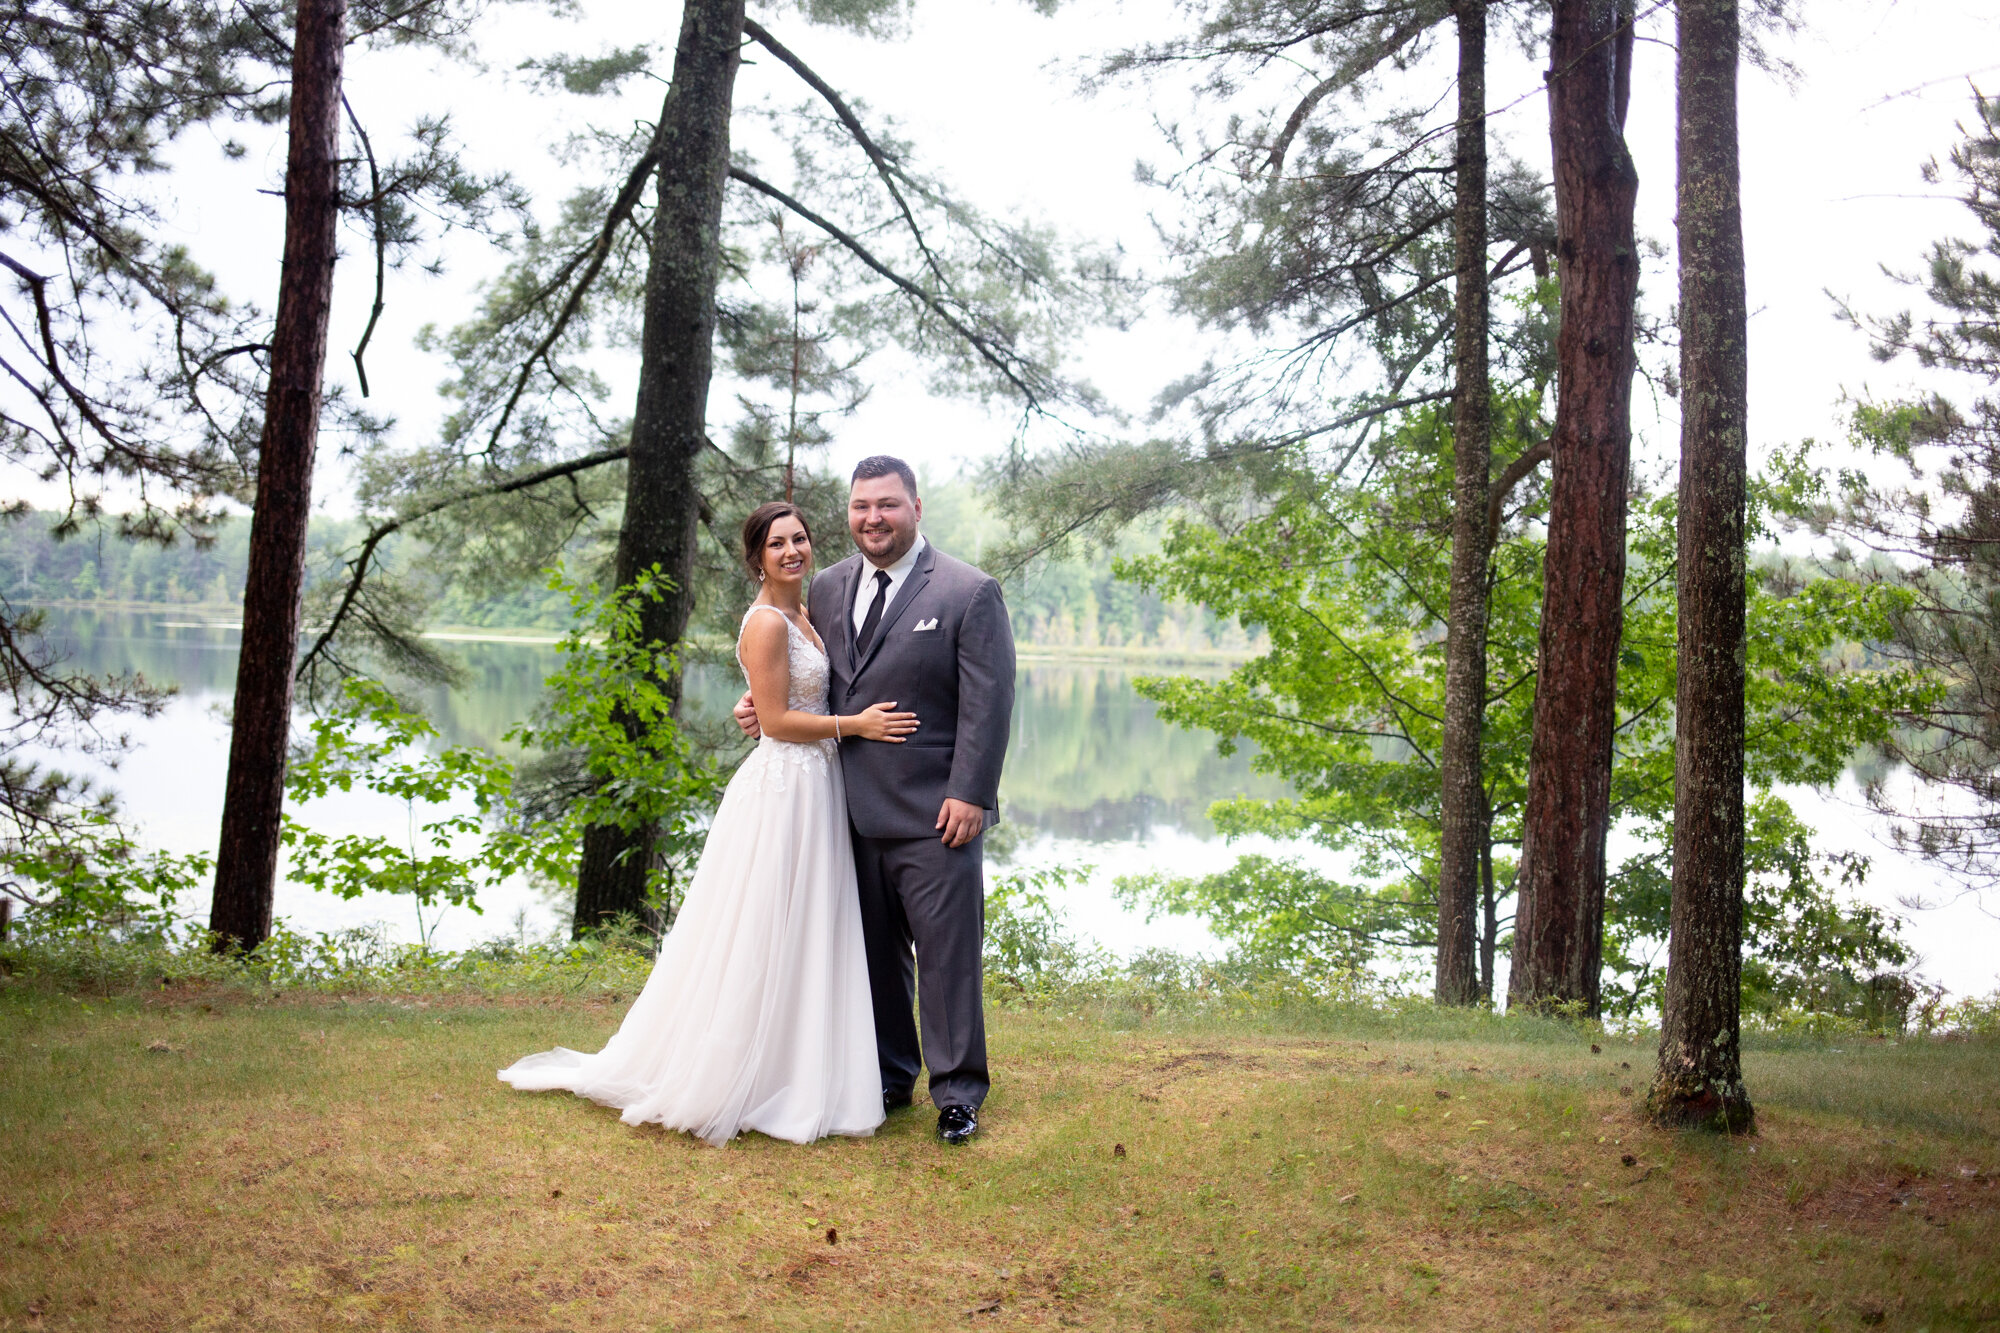 Nature-Inspired+Northwoods+Wedding+at+North+Lakeland+Discovery+Center+in+Manitowish+Waters+Wisconsin+-+Whit+Meza+Photography.jpeg